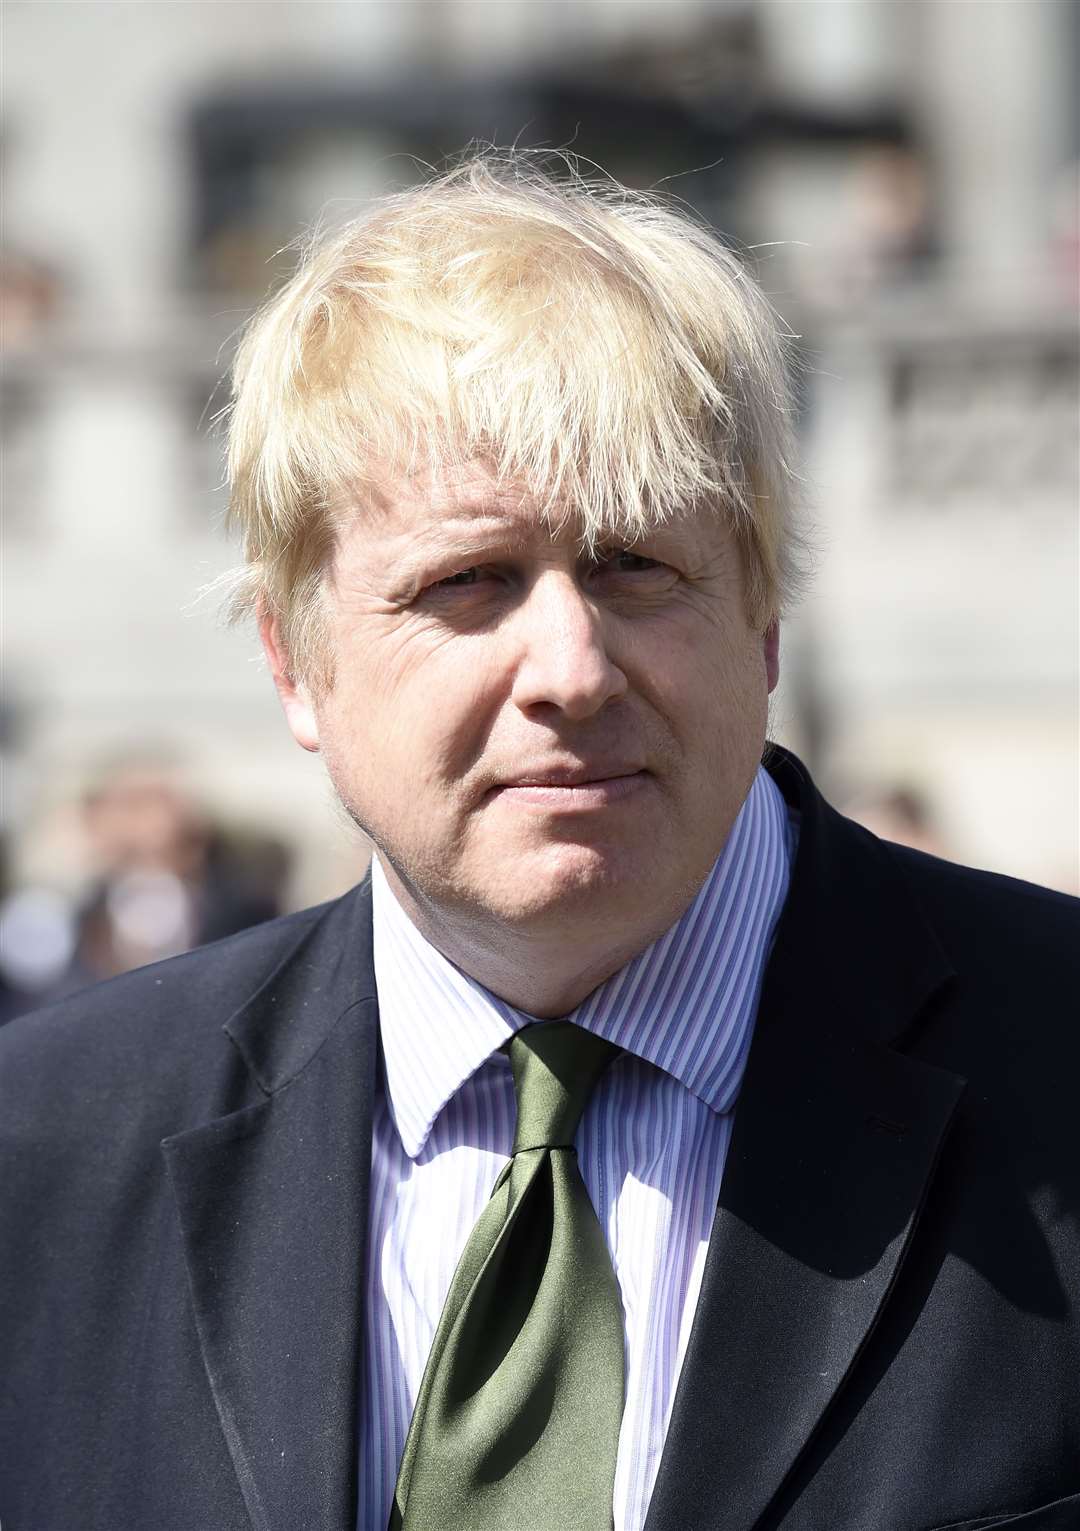 Boris Johnson chose not to extend the Congestion Charge Zone when he was Mayor of London (Lauren Hurley/PA)